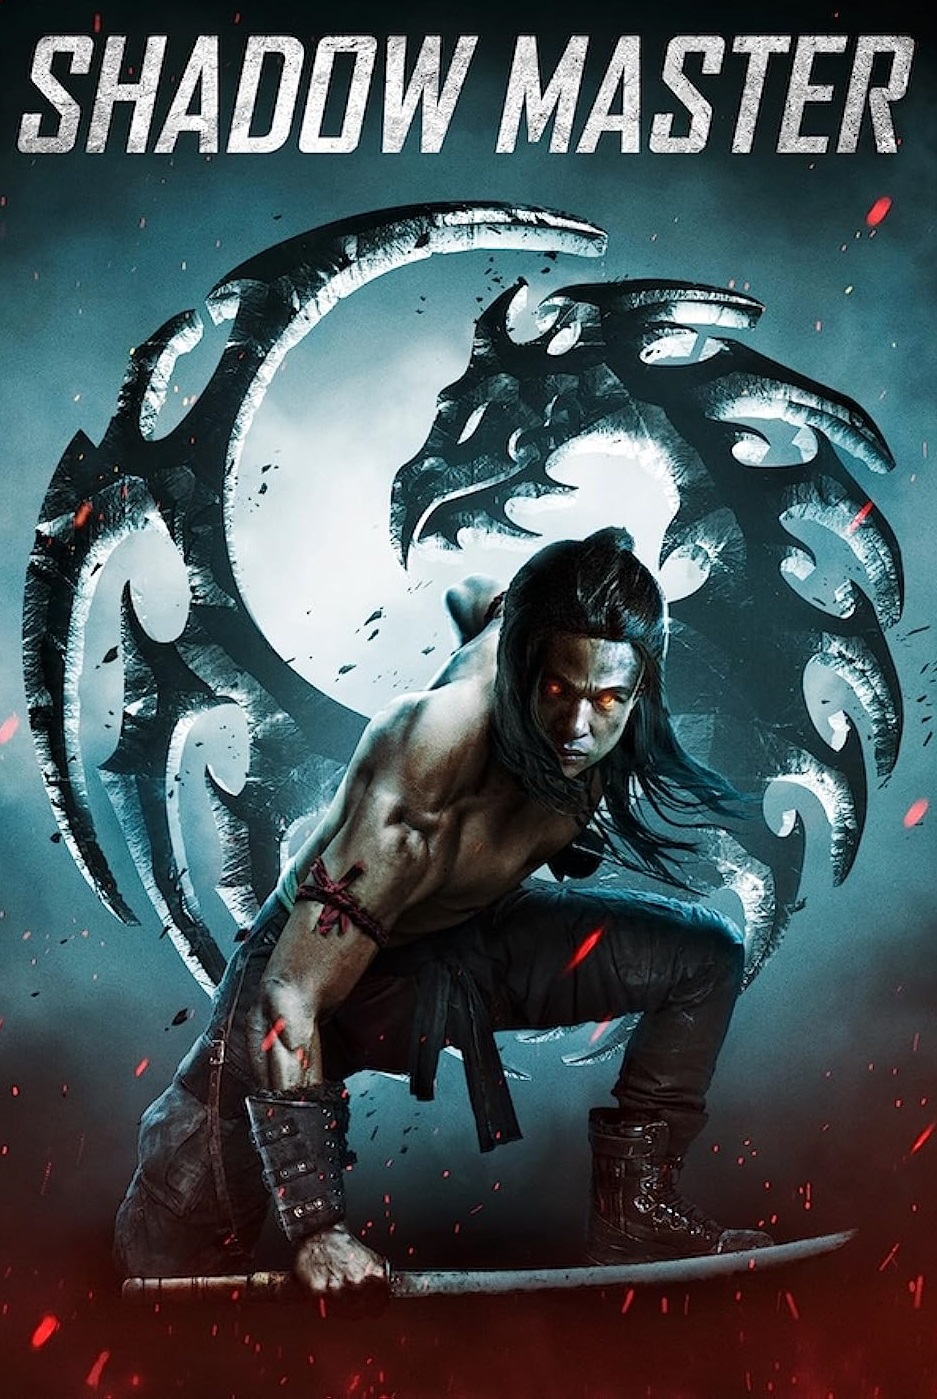 Shadow Master 2022 Tamil Dubbed Action Movie Online